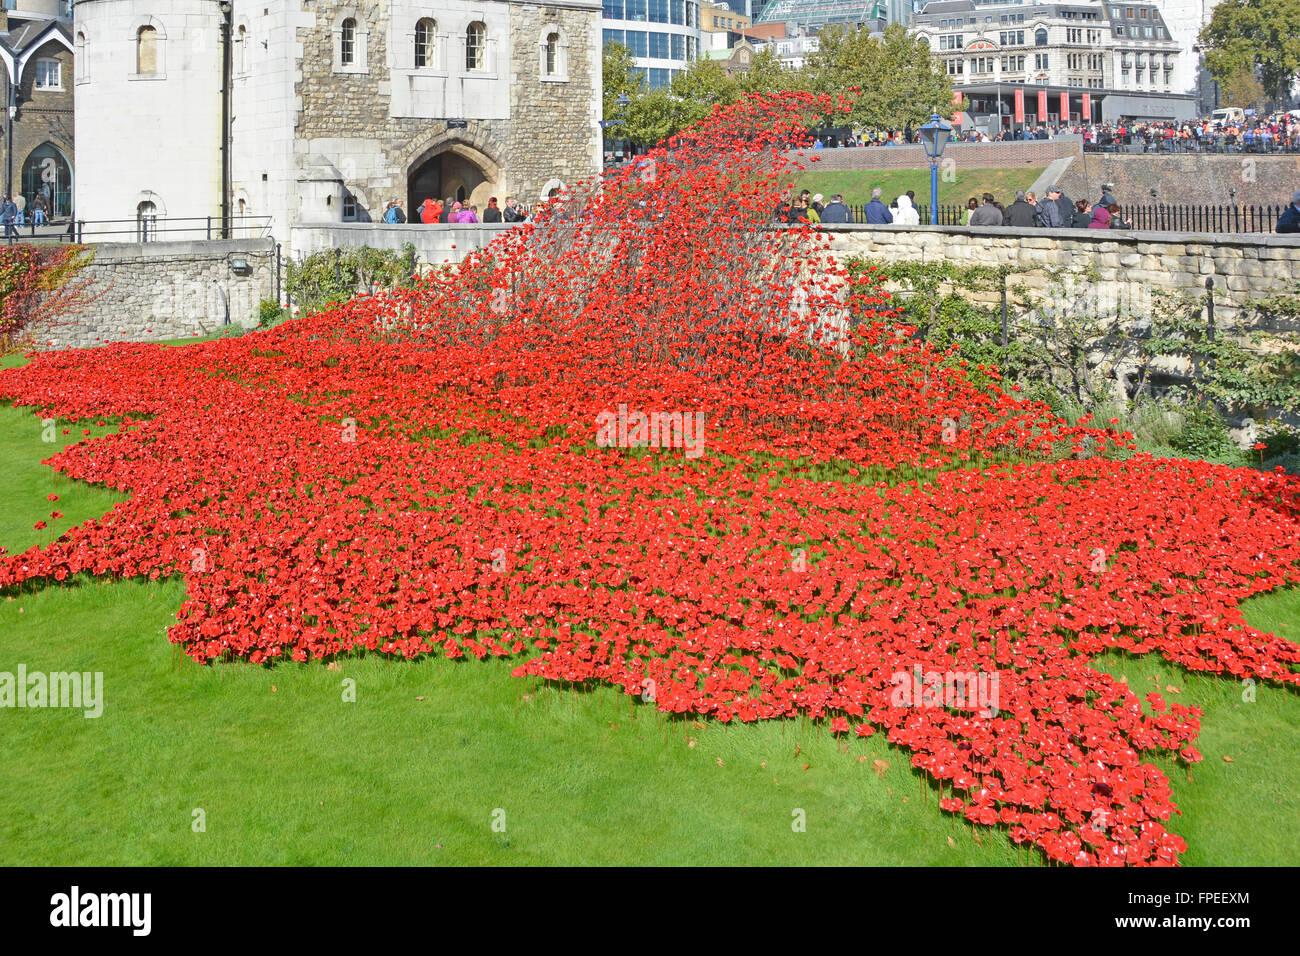 Cascading field of ceramic poppies 'Blood swept lands & seas of red' draped across dry moat at Tower of London as  World War 1 tribute to the fallen Stock Photo